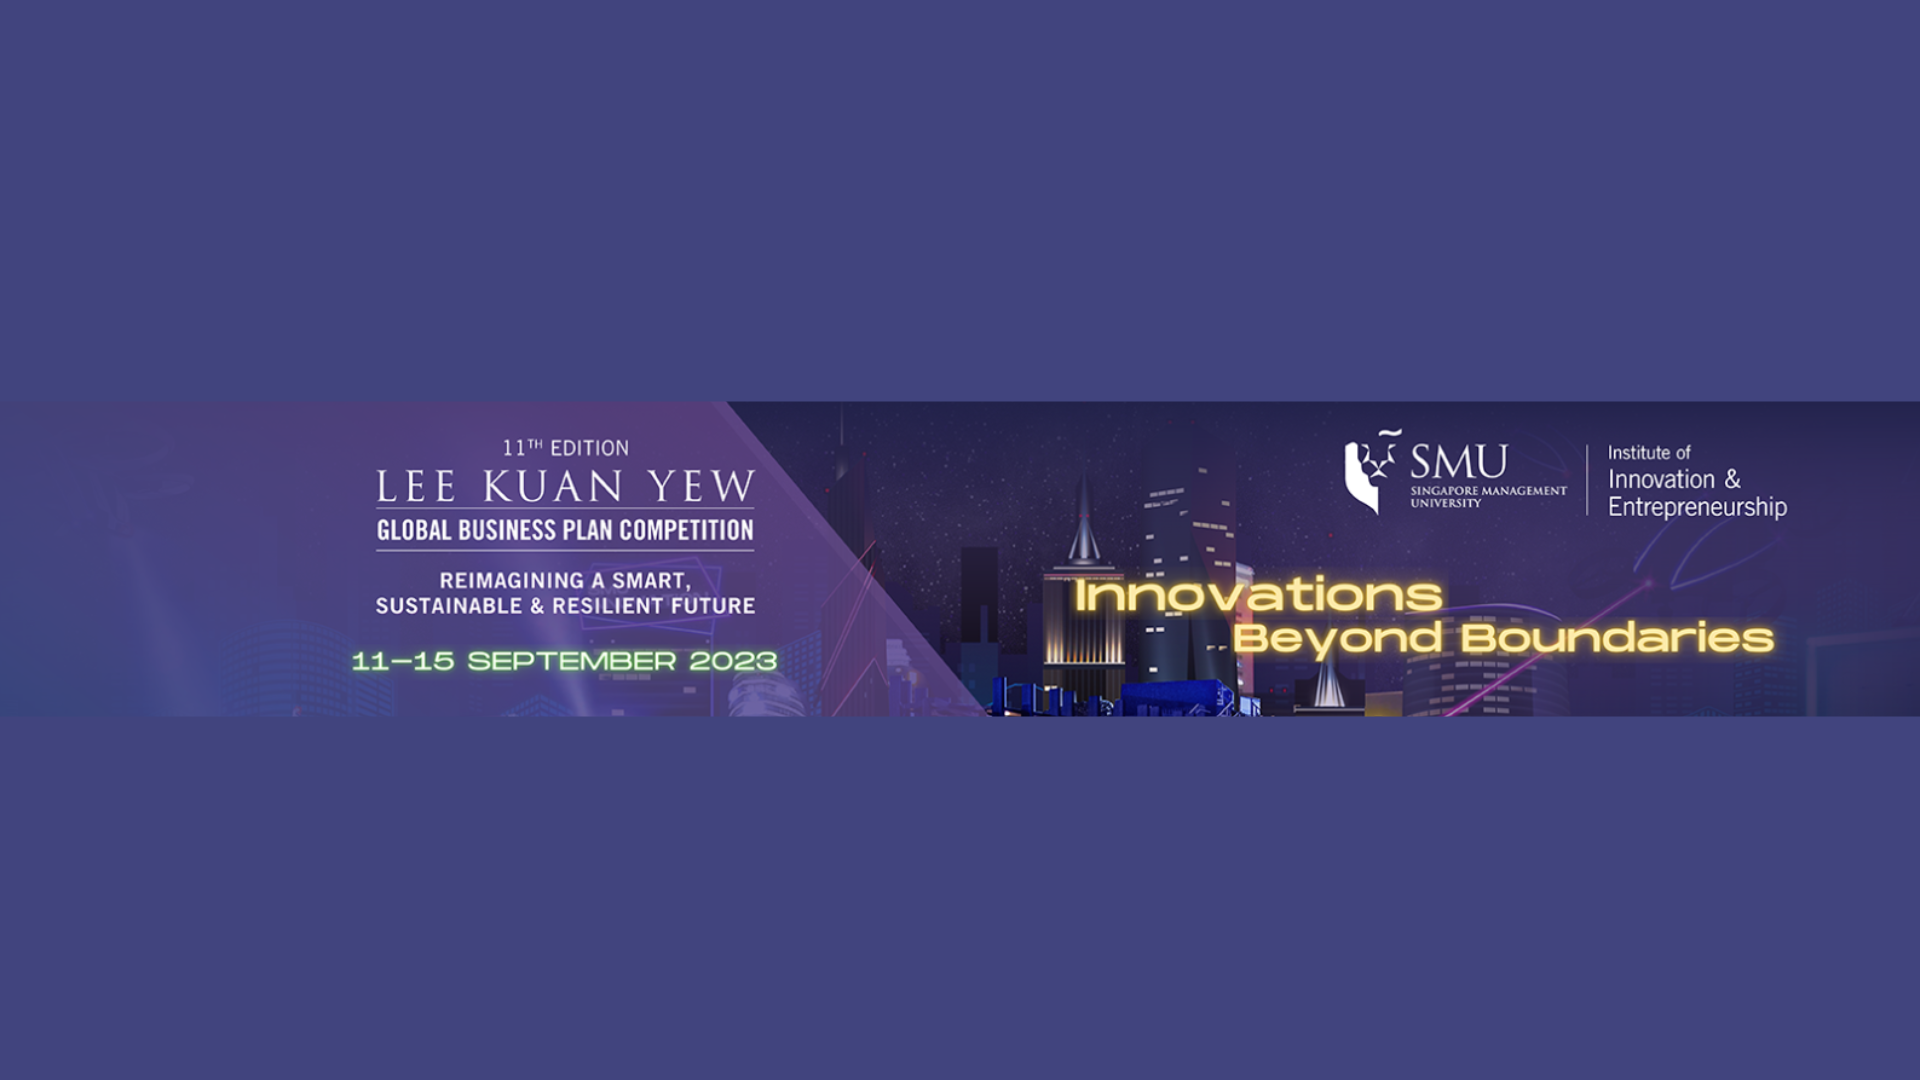 11th Edition Lee Kuan Yew Global Business Plan Competition | Singapore, Sept 15th -17th  2023